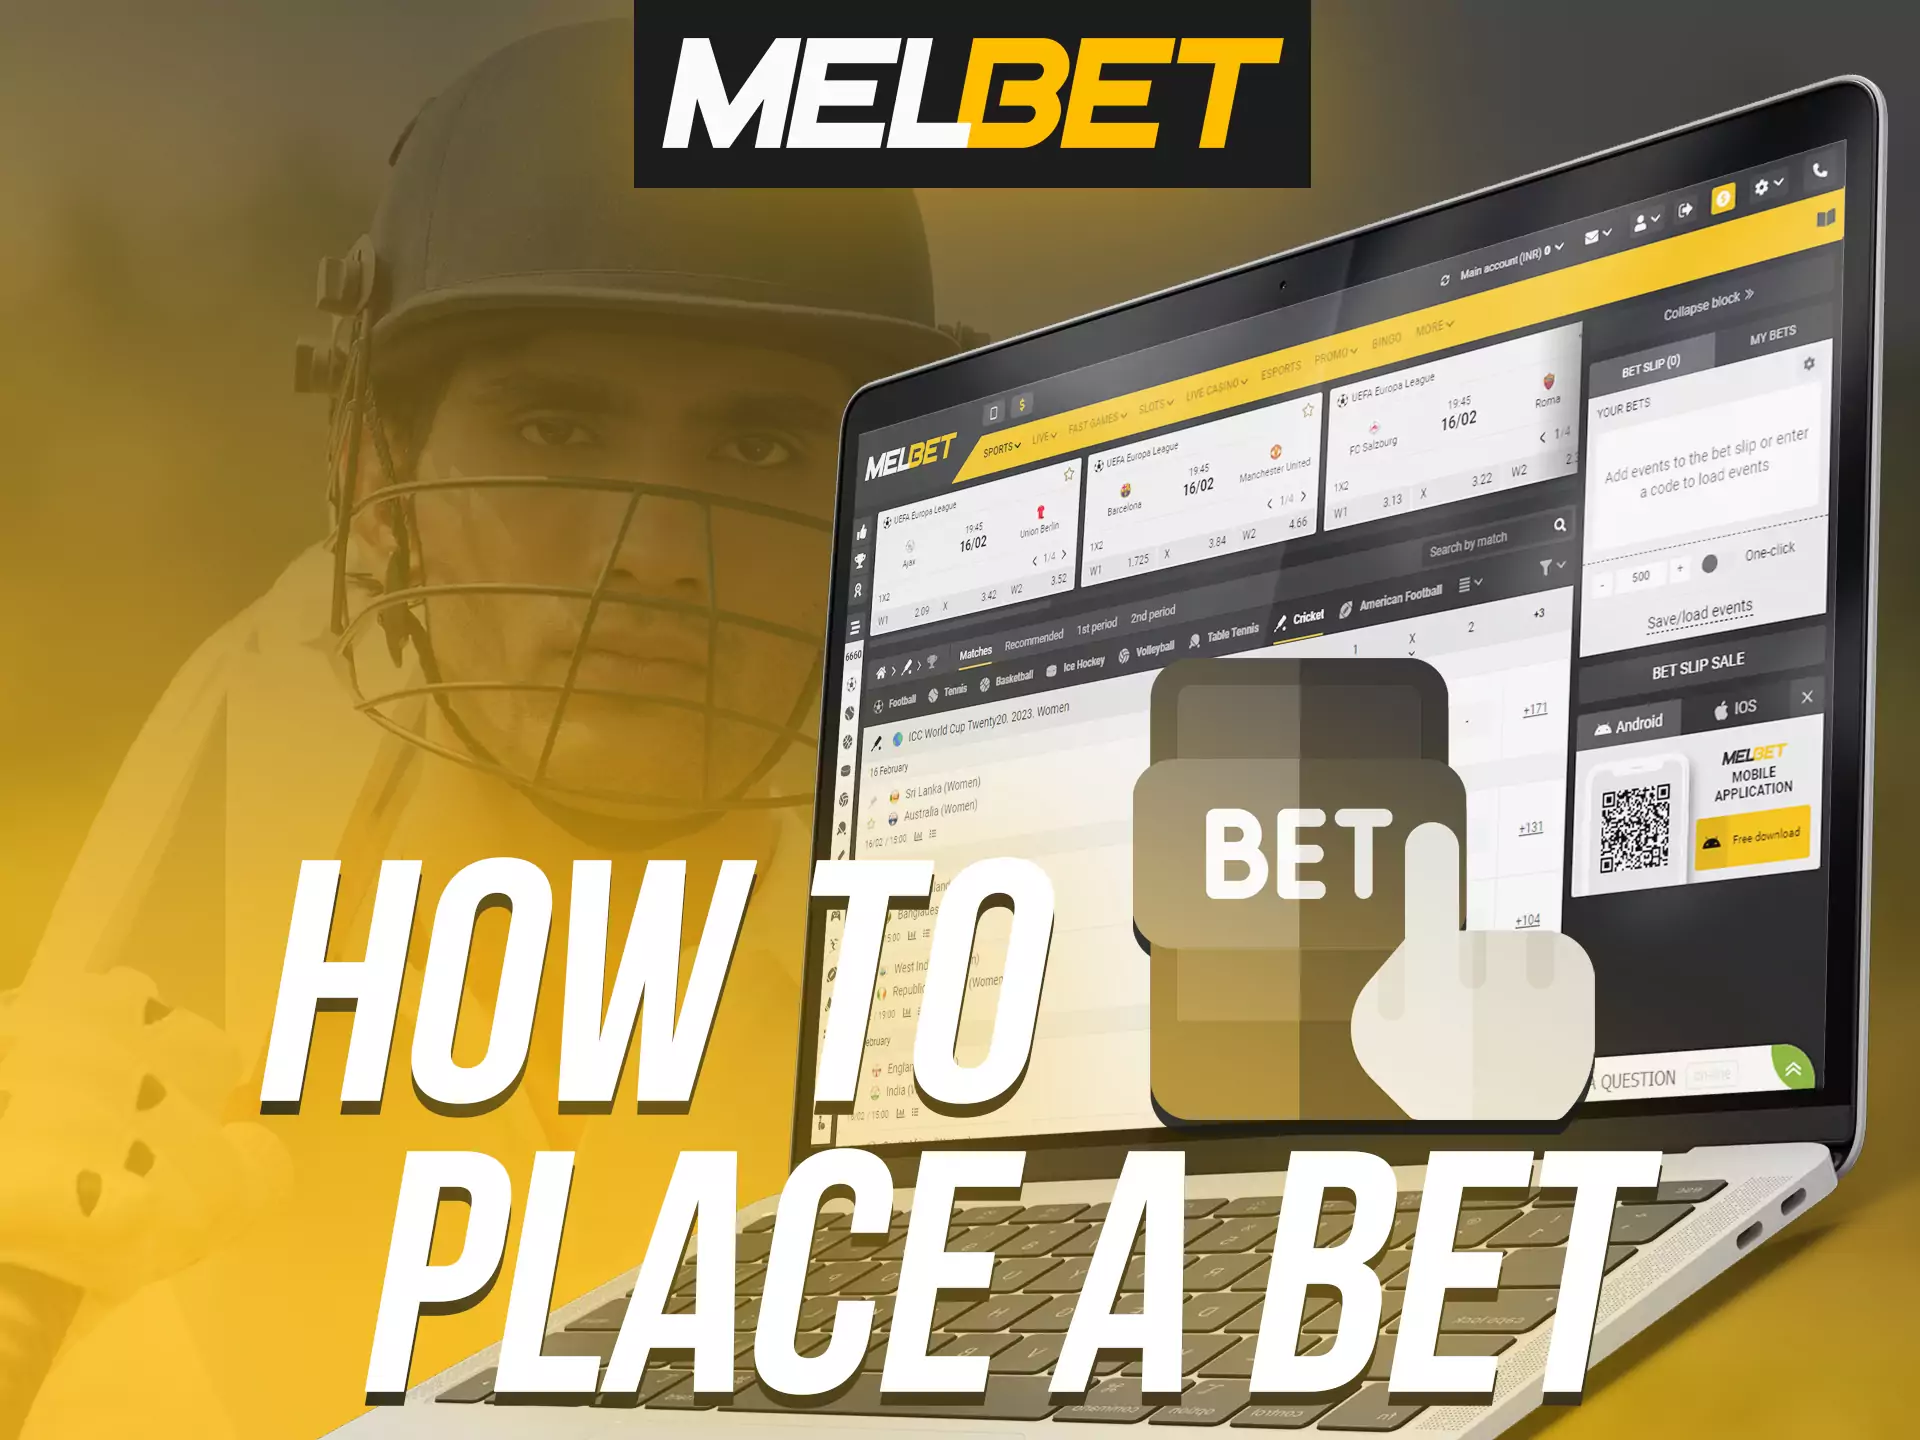 Placing bets at Melbet is simple.